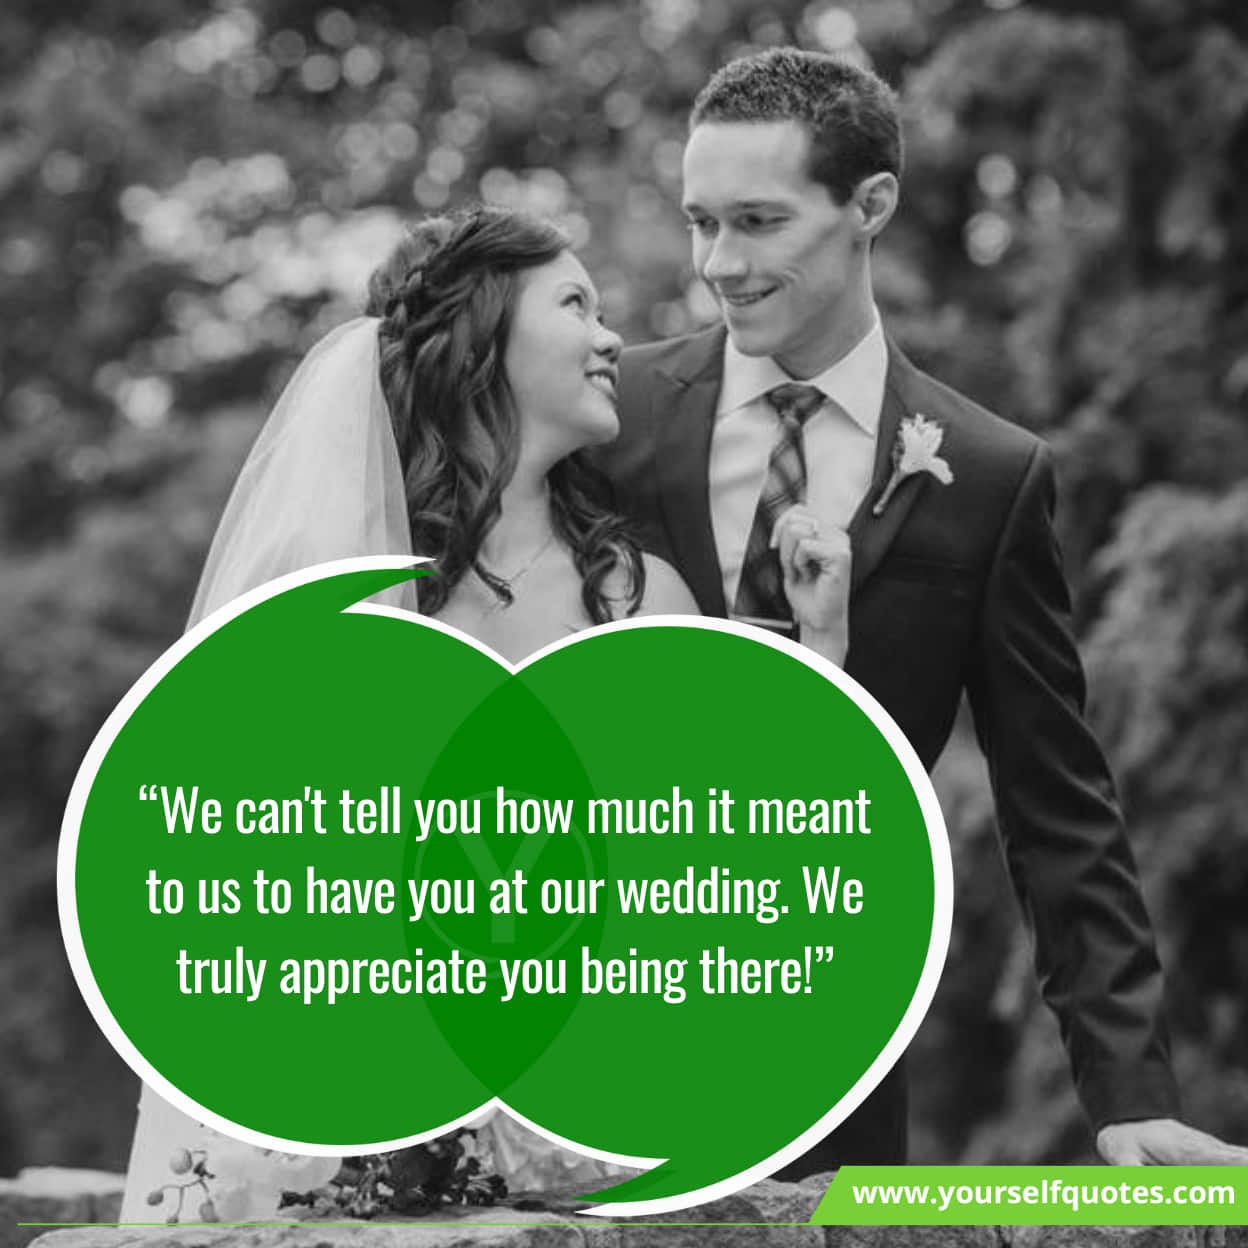 Top 10 Wedding Thank You Messages & Wording